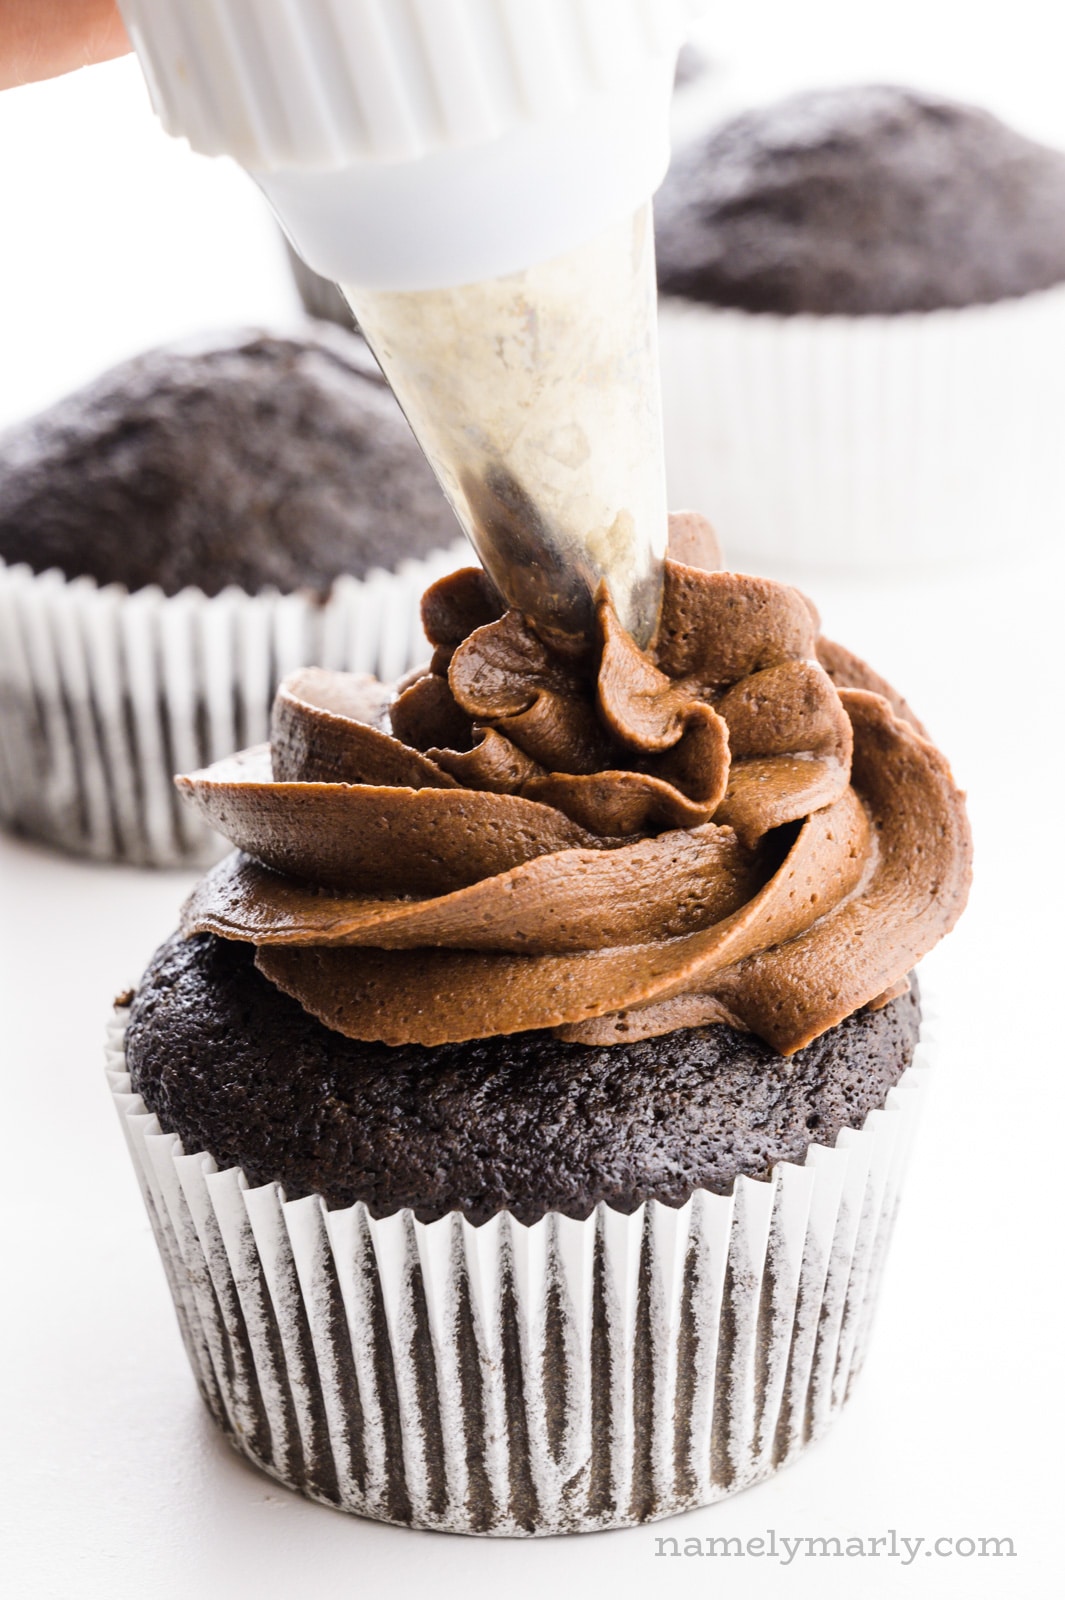 A hand holds a piping bag full of chocolate frosting and is distributing it over a chocolate cupcake.